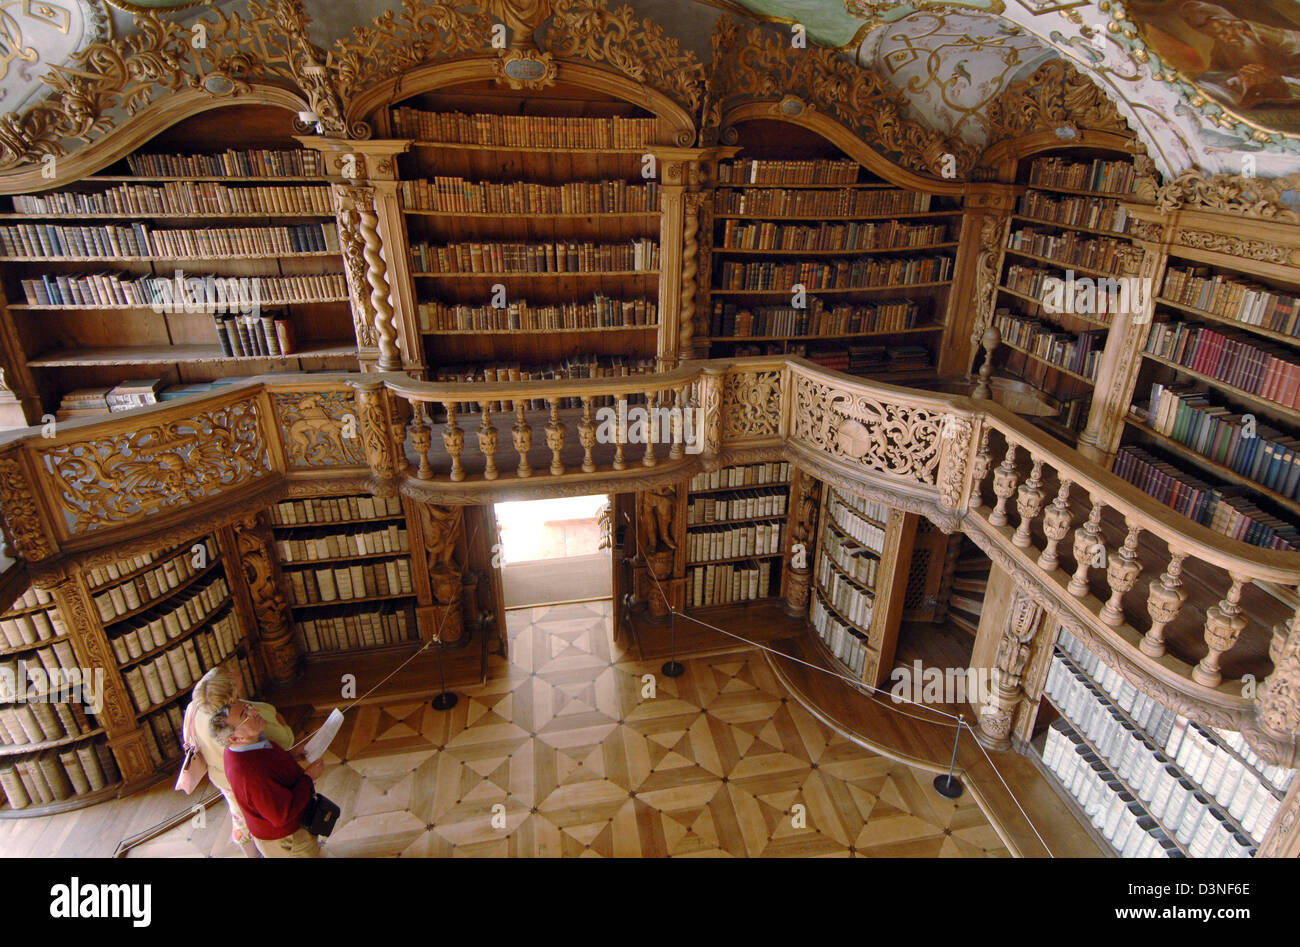 The picture shows the impressive interior of the monastic library in Waldsassen, Germany, 24 April 2006. Accomplished in 1726 the monastic library stuffed with more than 2,000 volumes of theologic papers marks the transient of style from the High Baroque to Rococo. The ten livesize wooden figures graved by sculptor Karl Stilp (1668 - 1735) carry the gallery spanning around the hall Stock Photo